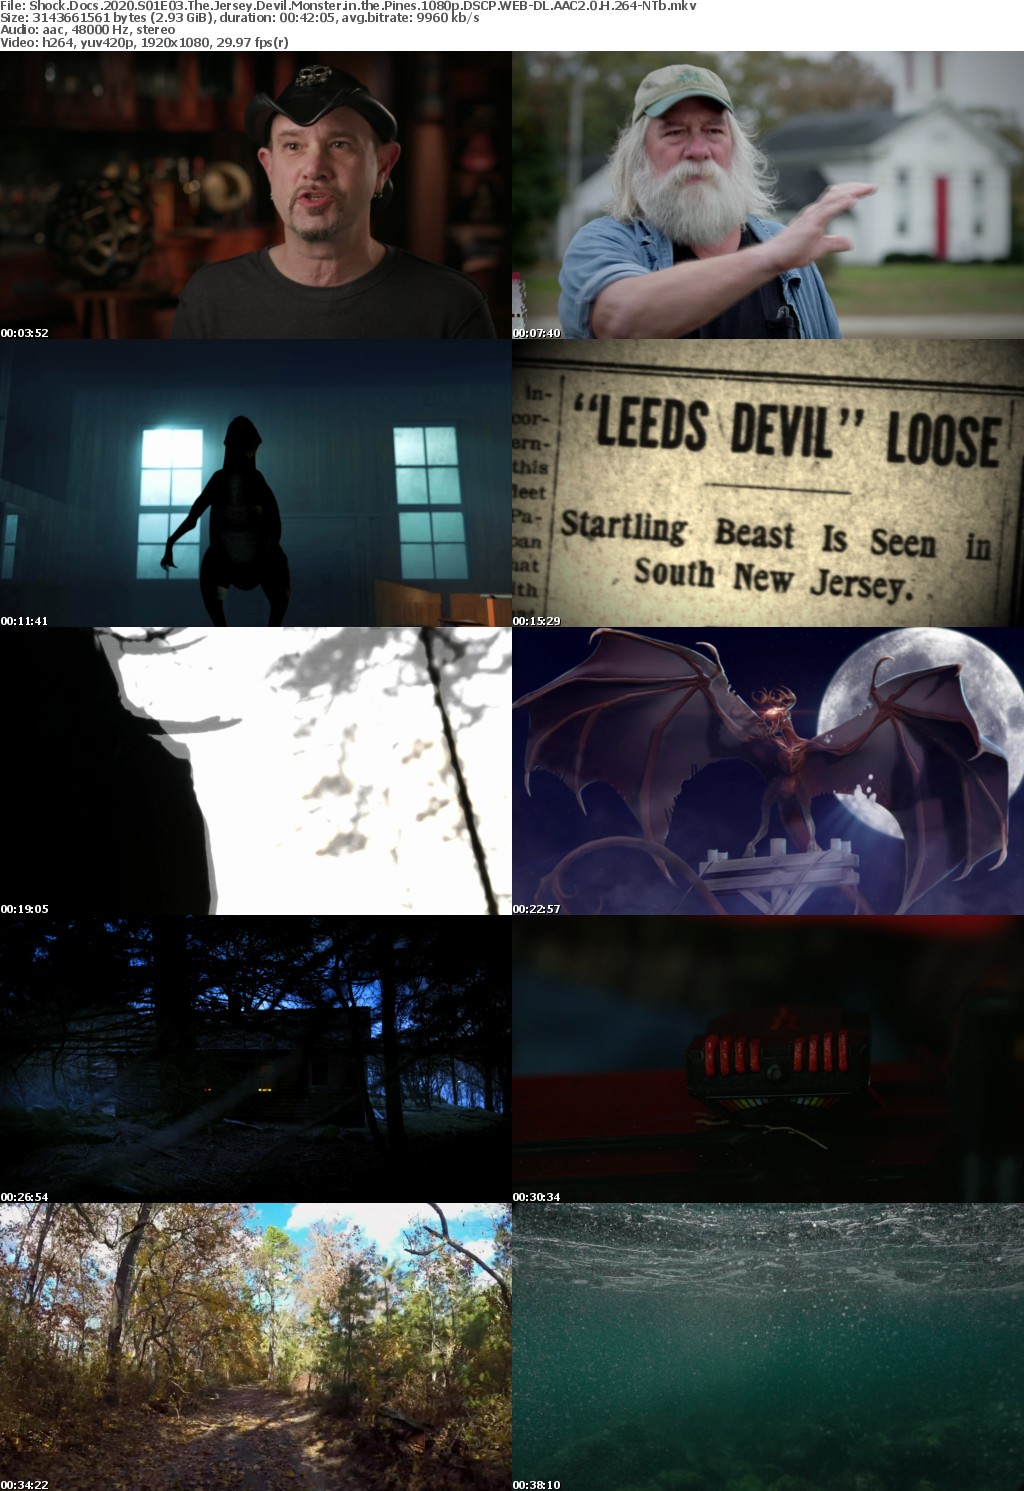 Shock Docs 2020 S01E03 The Jersey Devil Monster in the Pines 1080p DSCP WEB-DL AAC2 0 H 264-NTb